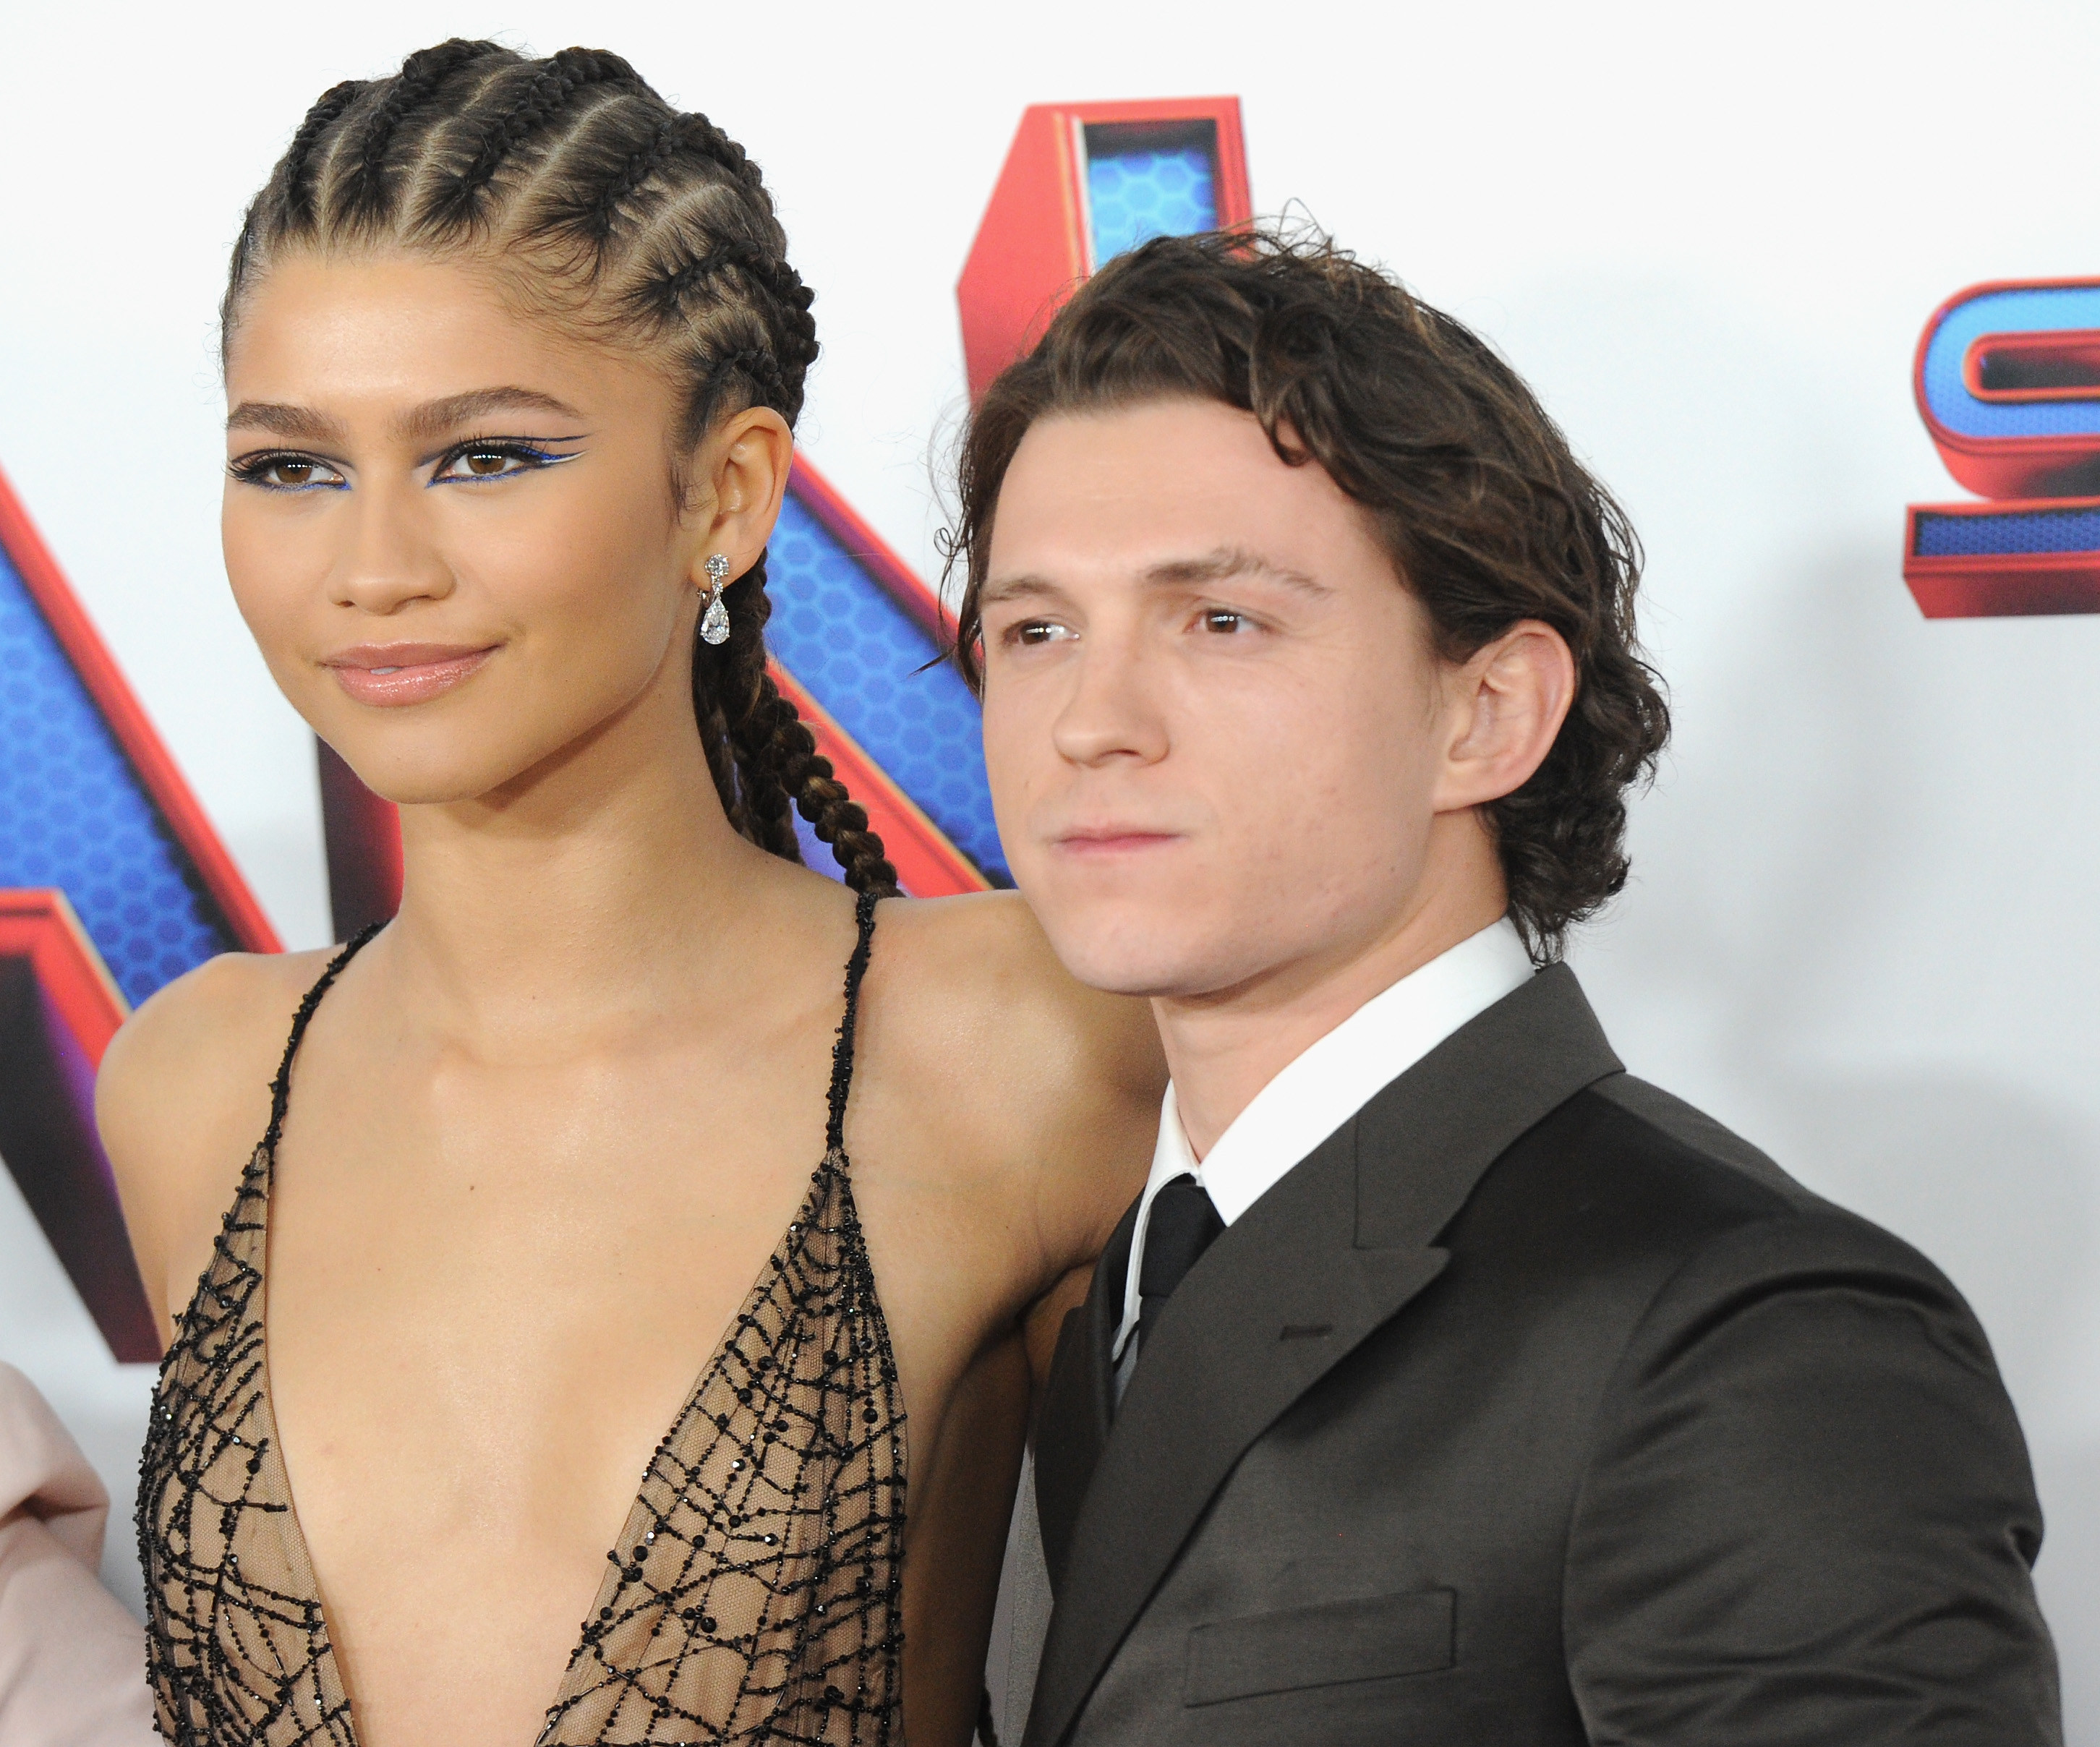 Zendaya and Tom Holland pose for a picture together